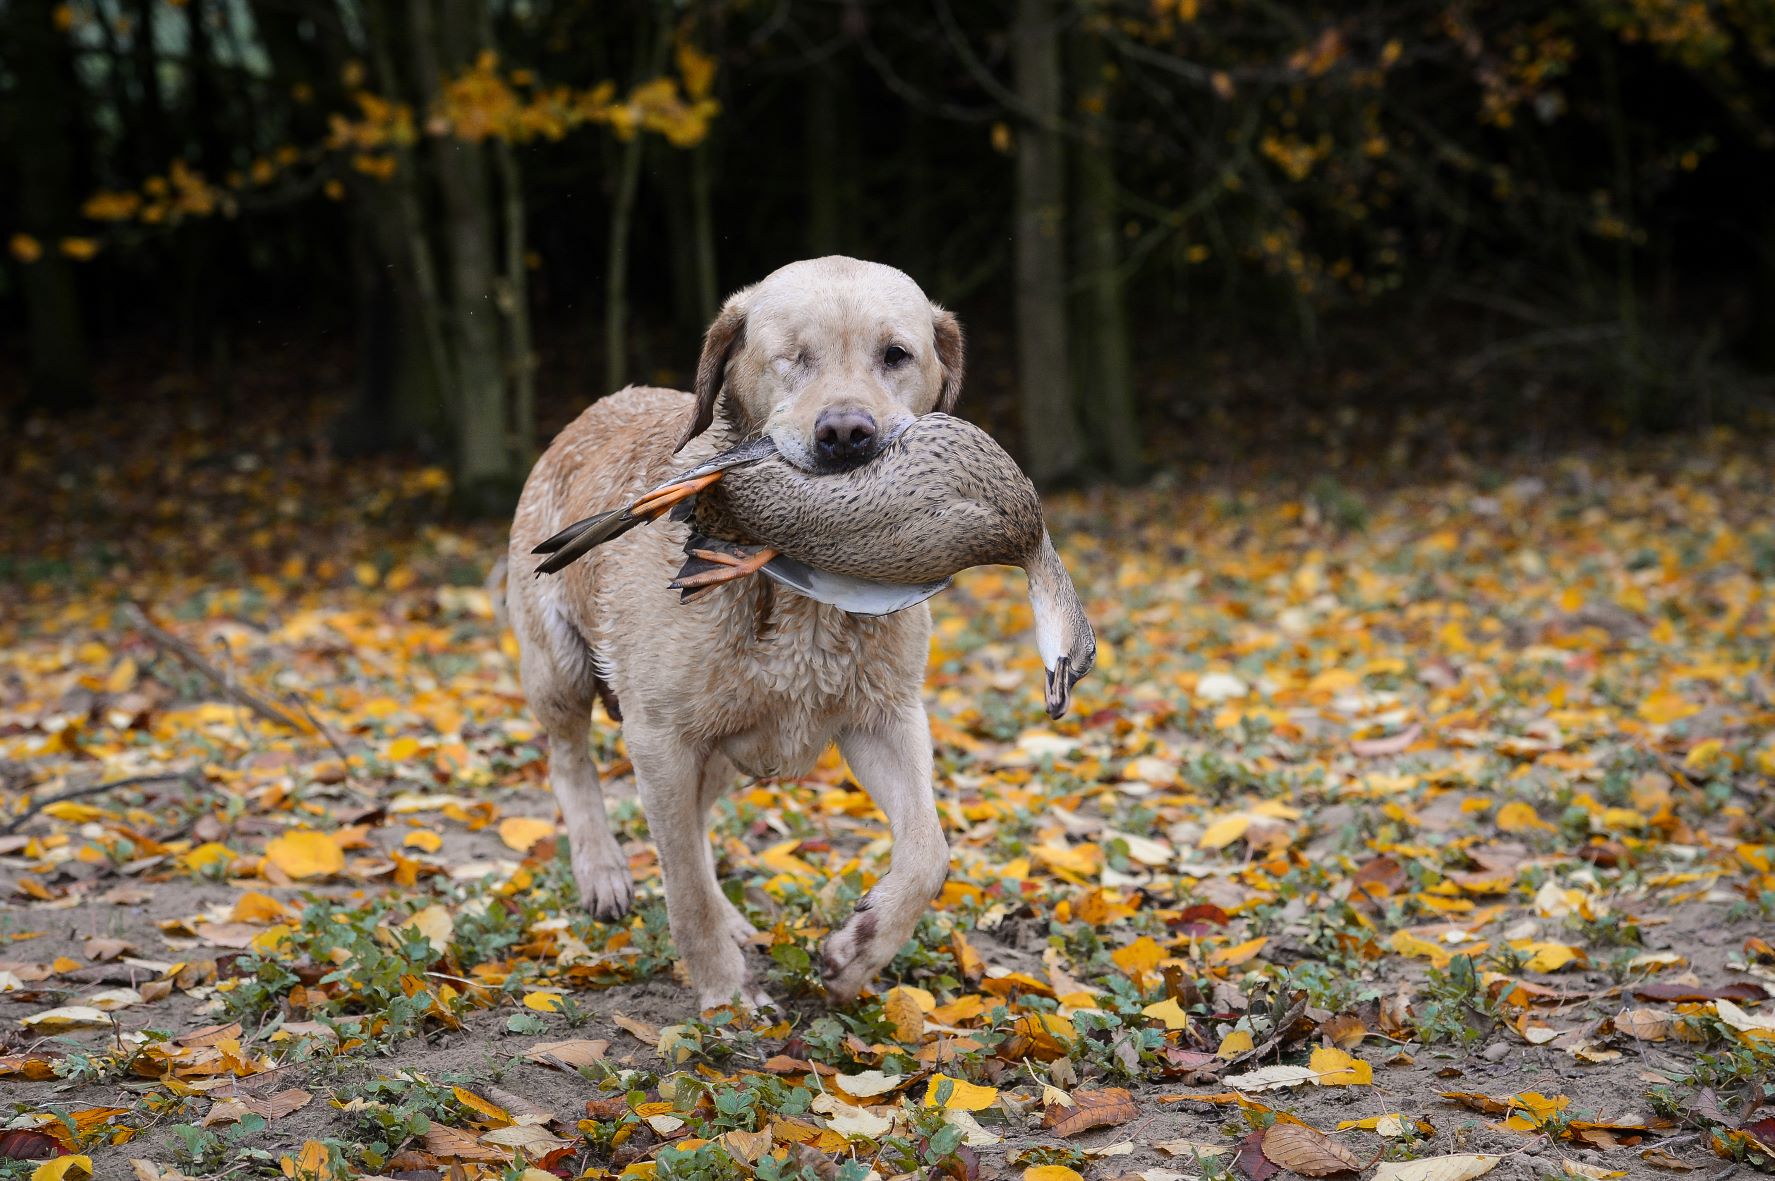 golden coloured dog who is blind in one eye retrieving a game bird